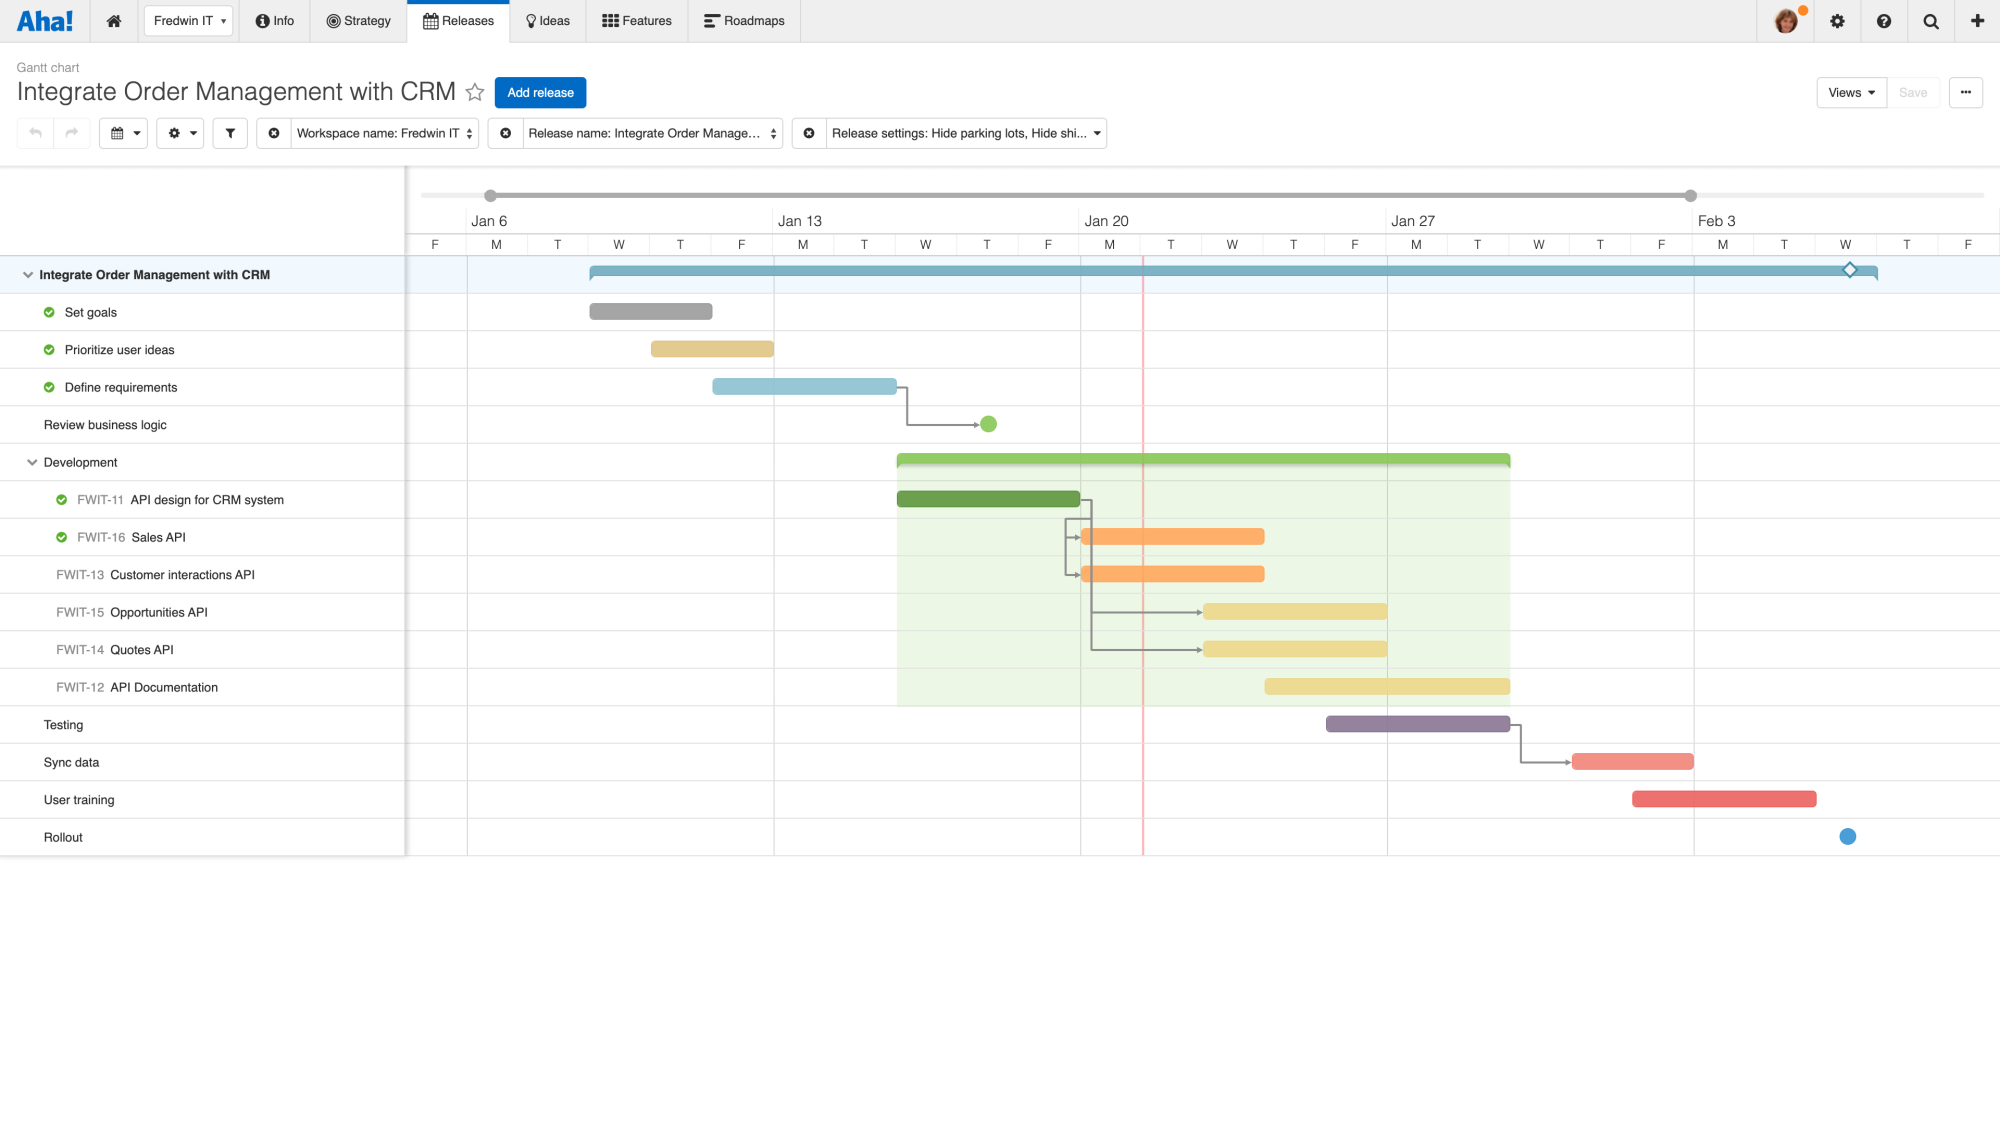 A gantt chart for integrating an order management system with a CRM.